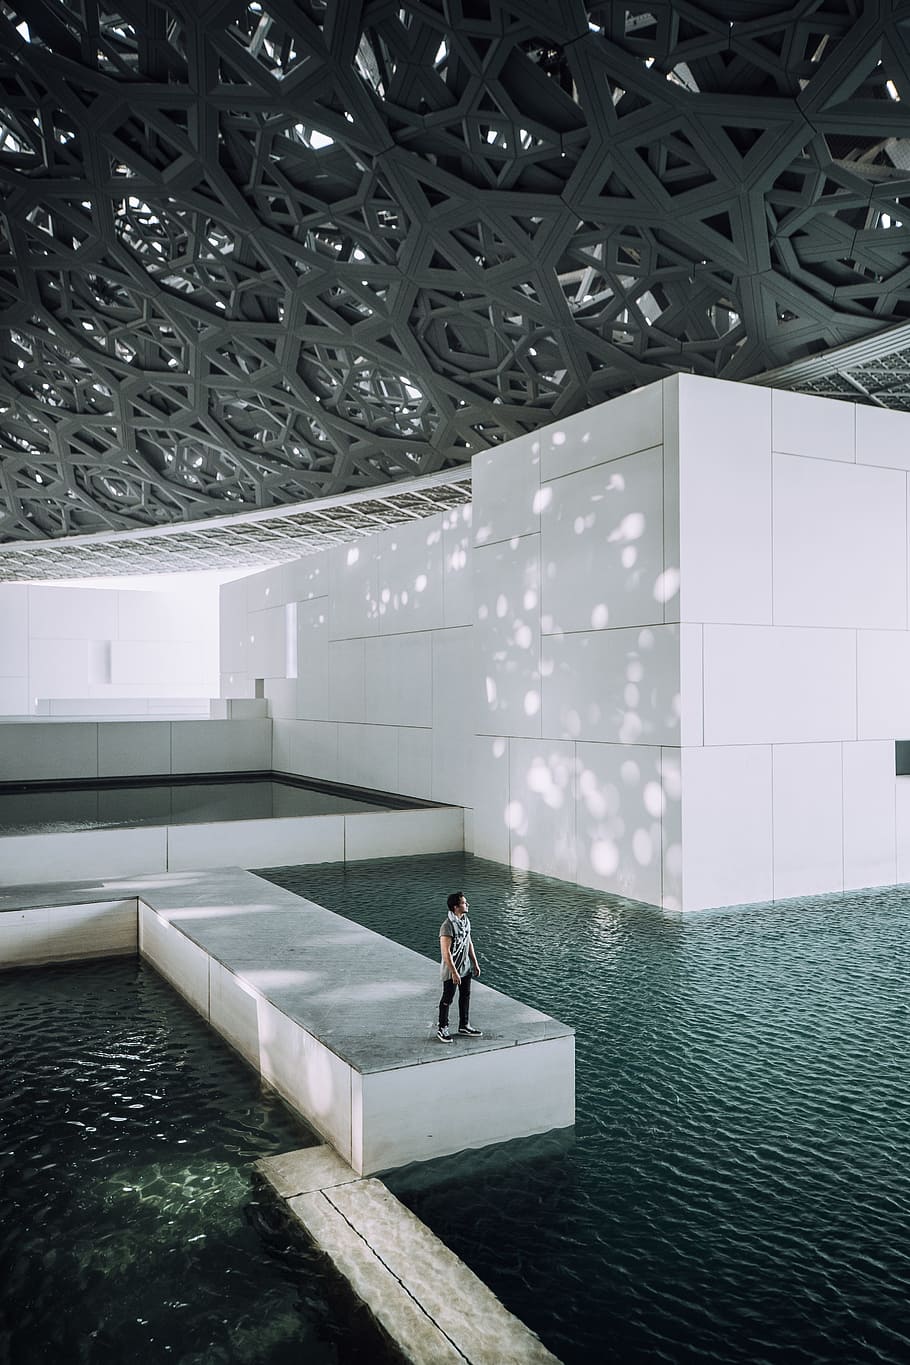 person standing near body of water inside building, pool, water feature